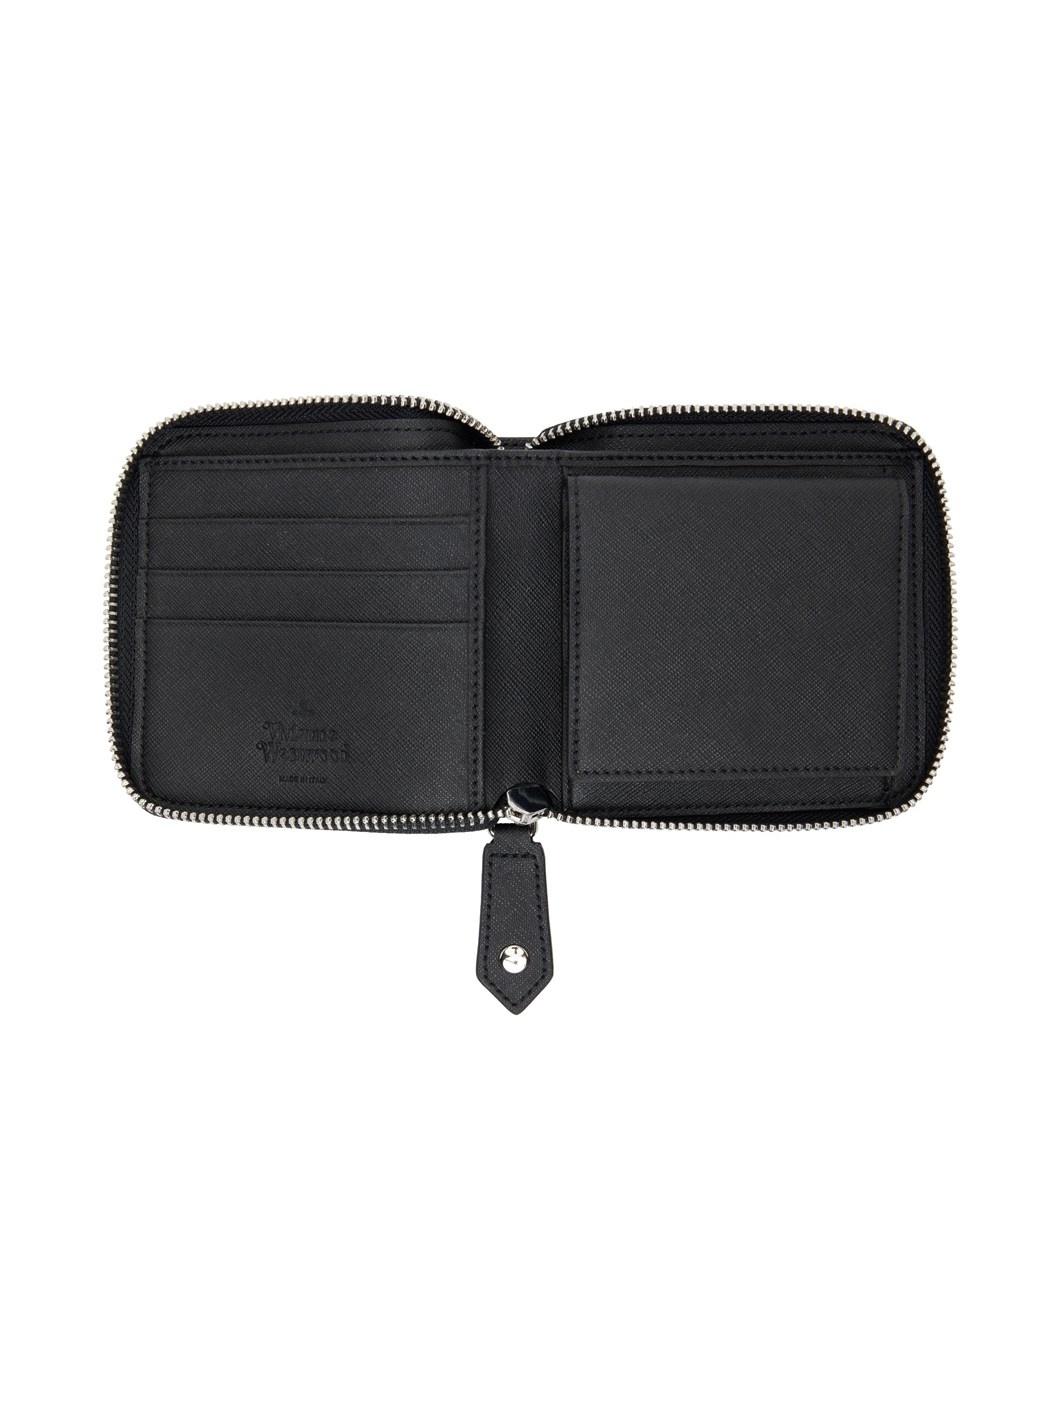 Black Saffiano Biogreen Rounded Square Wallet - 3